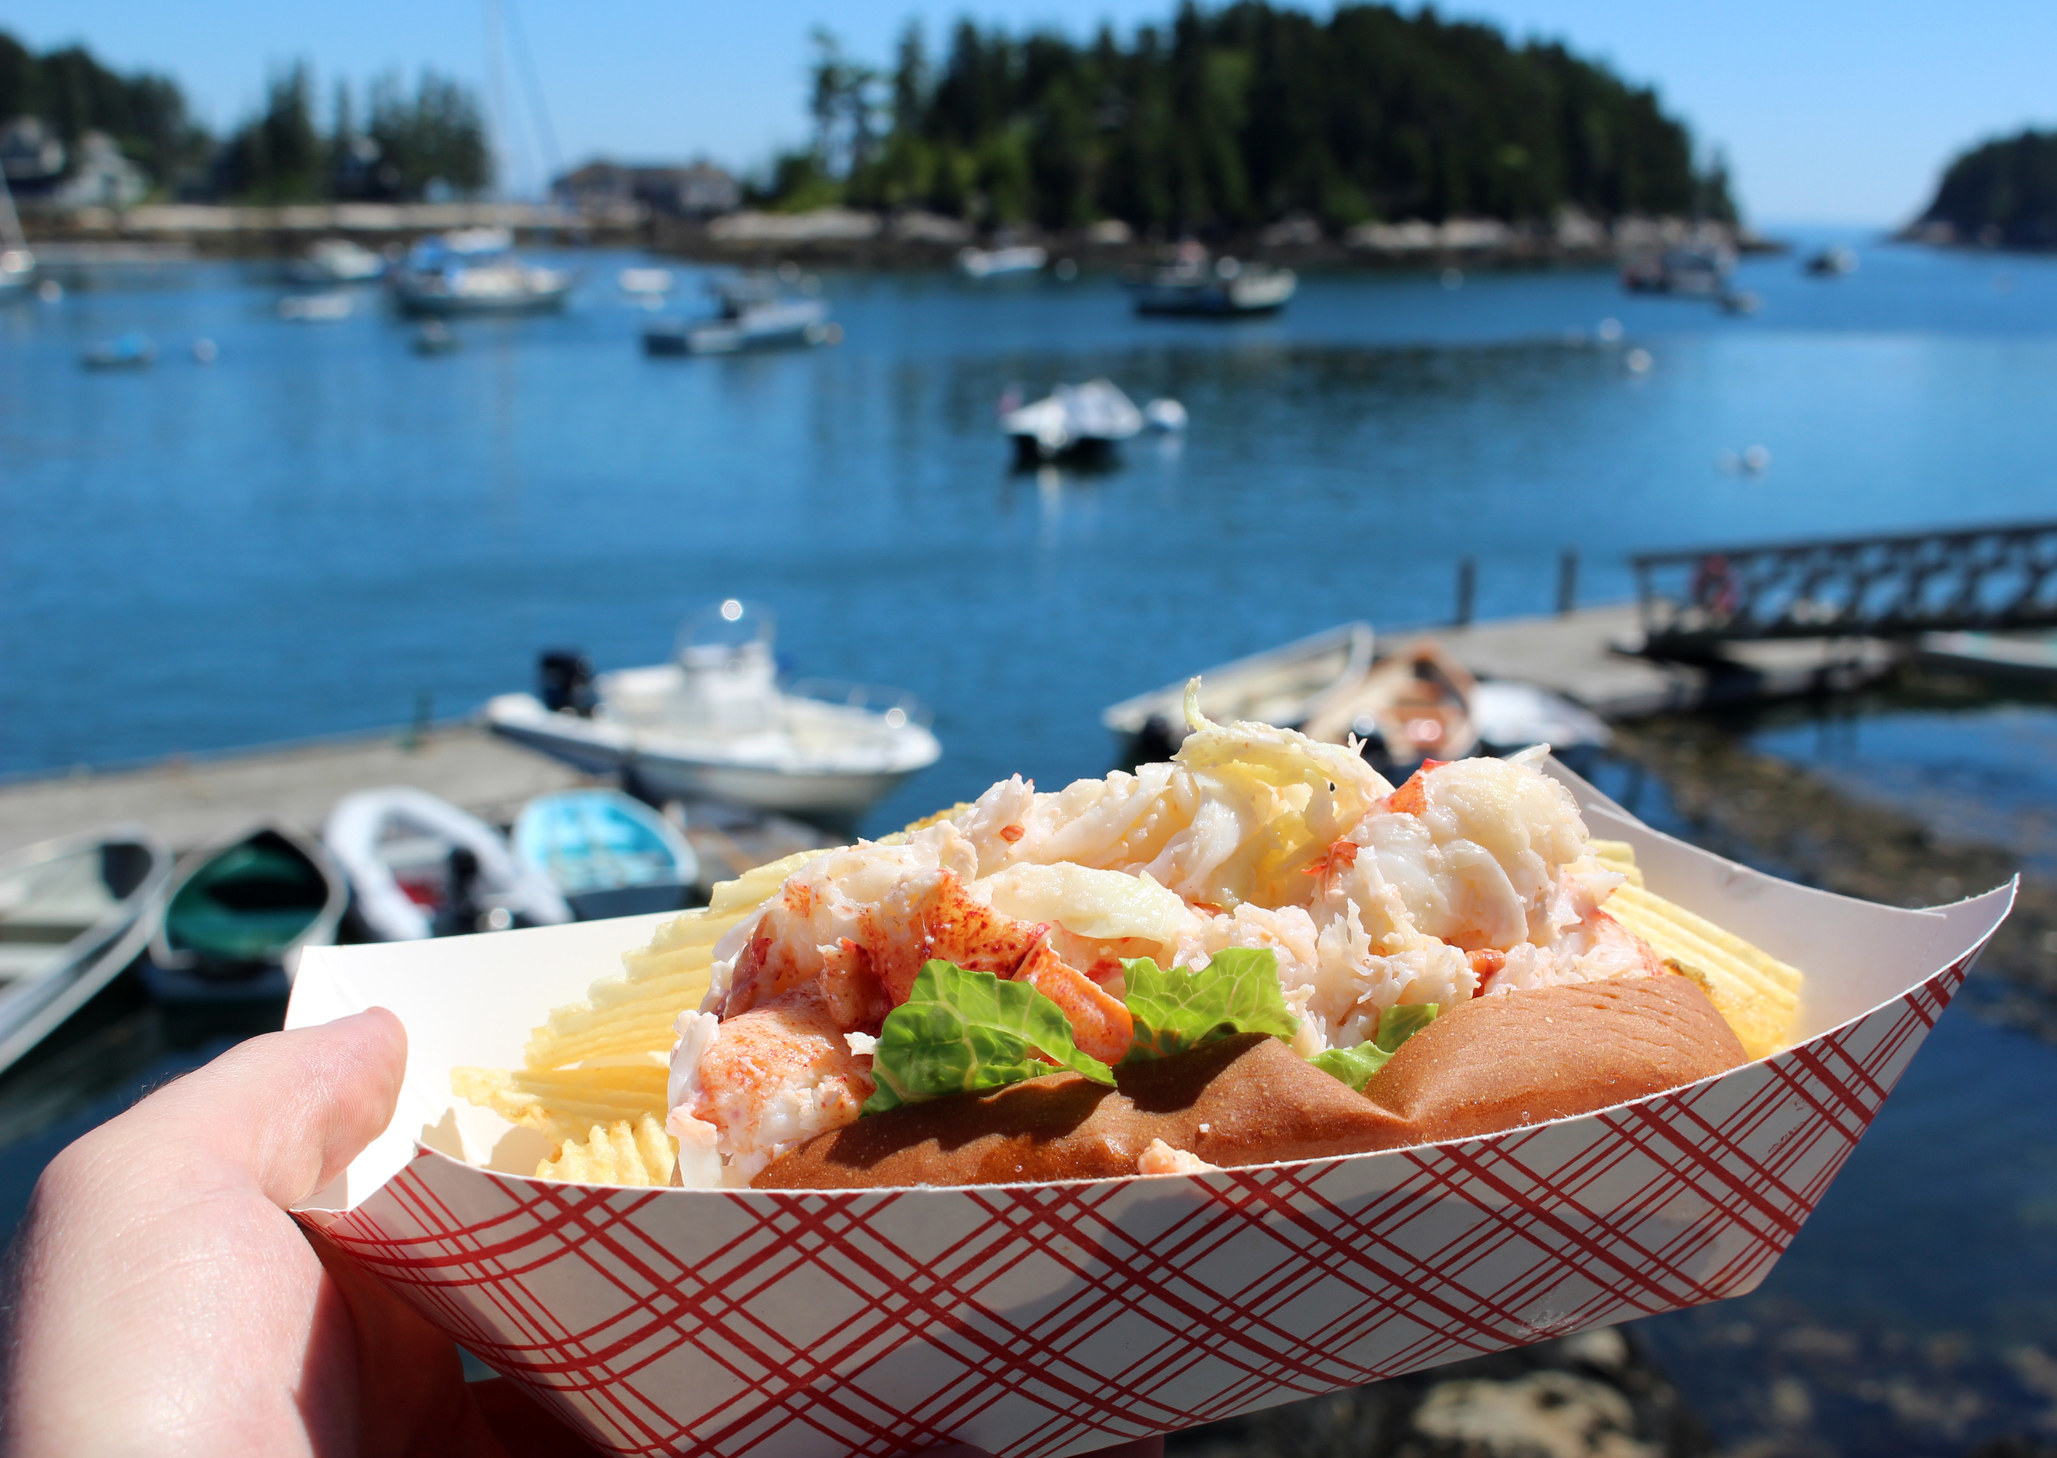 Lobster roll by the water.